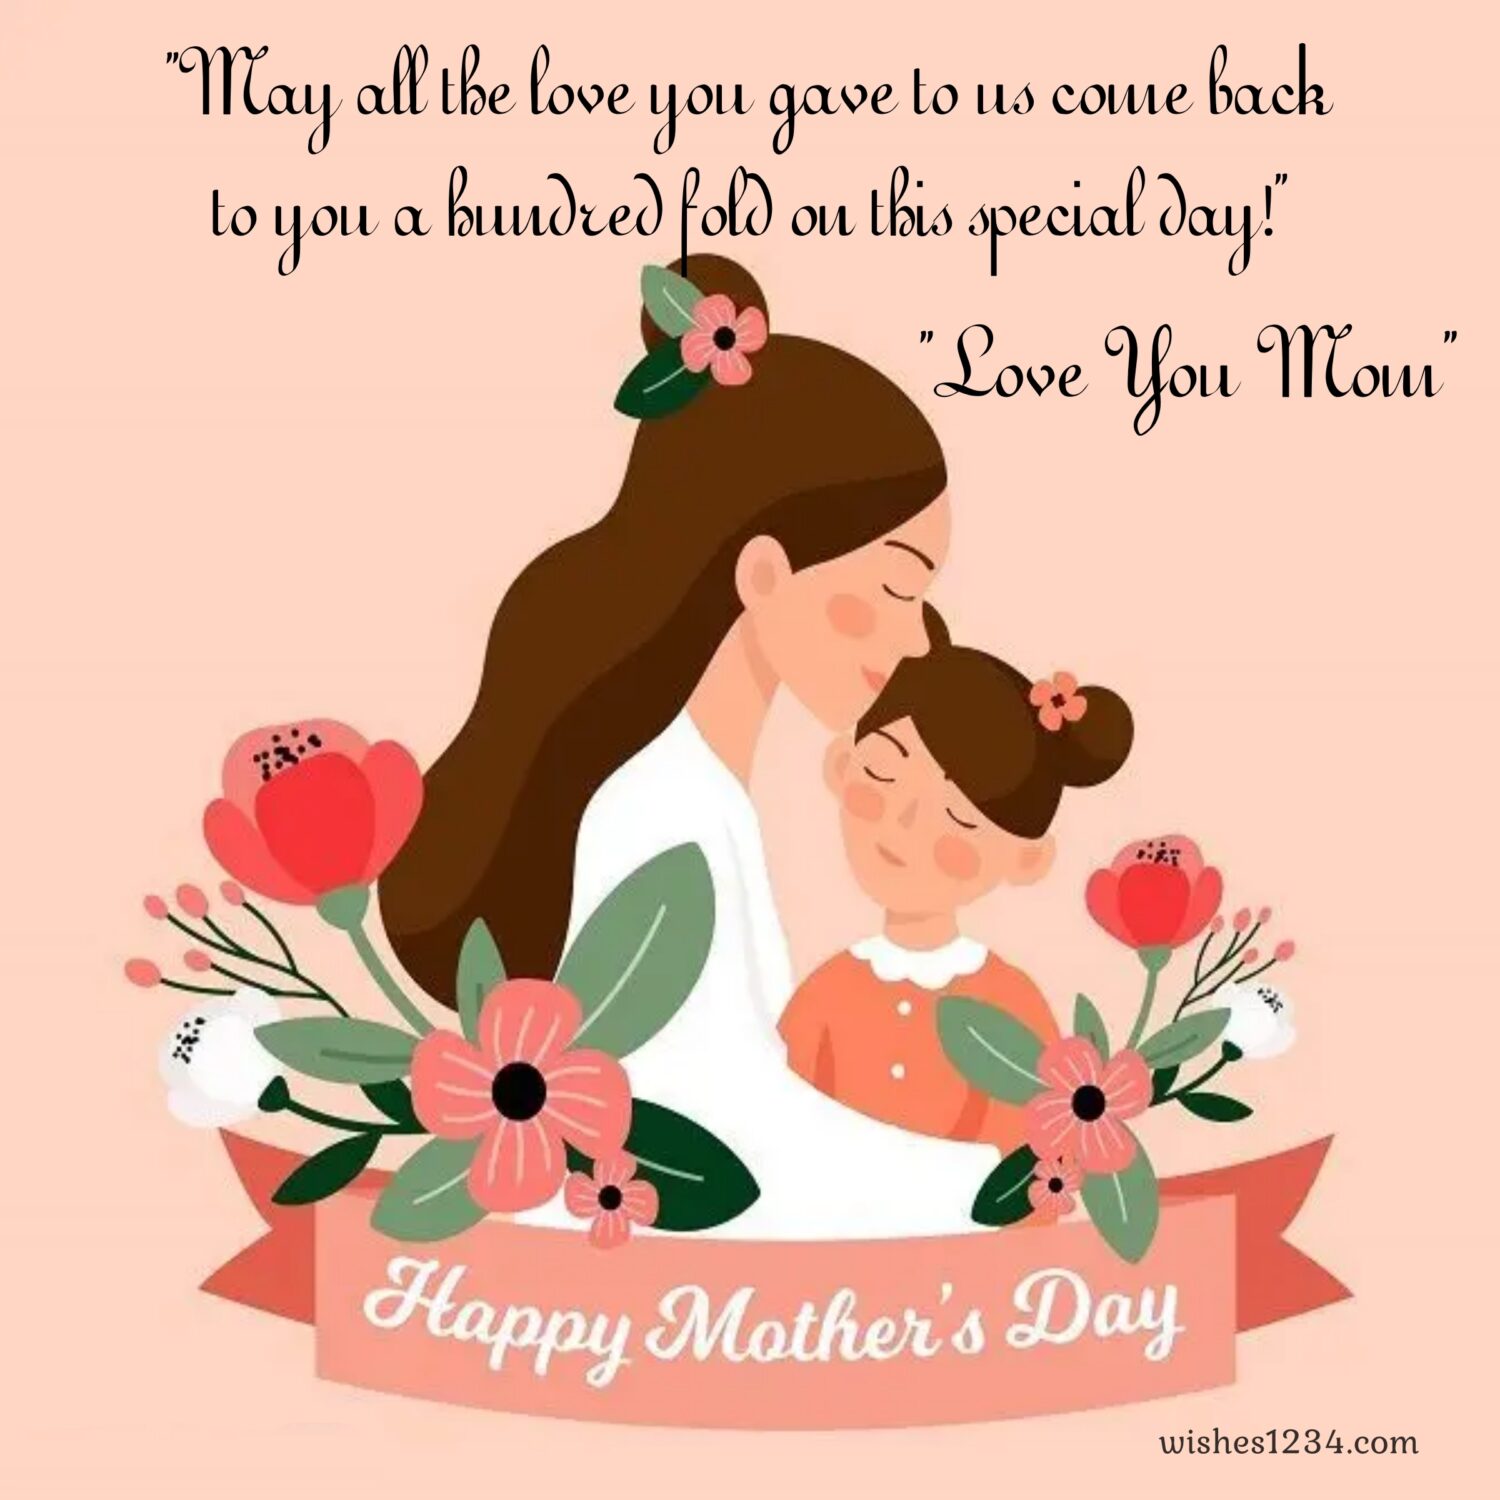 Cartoon of mother holding baby girl in arms, Mothers day quotes.